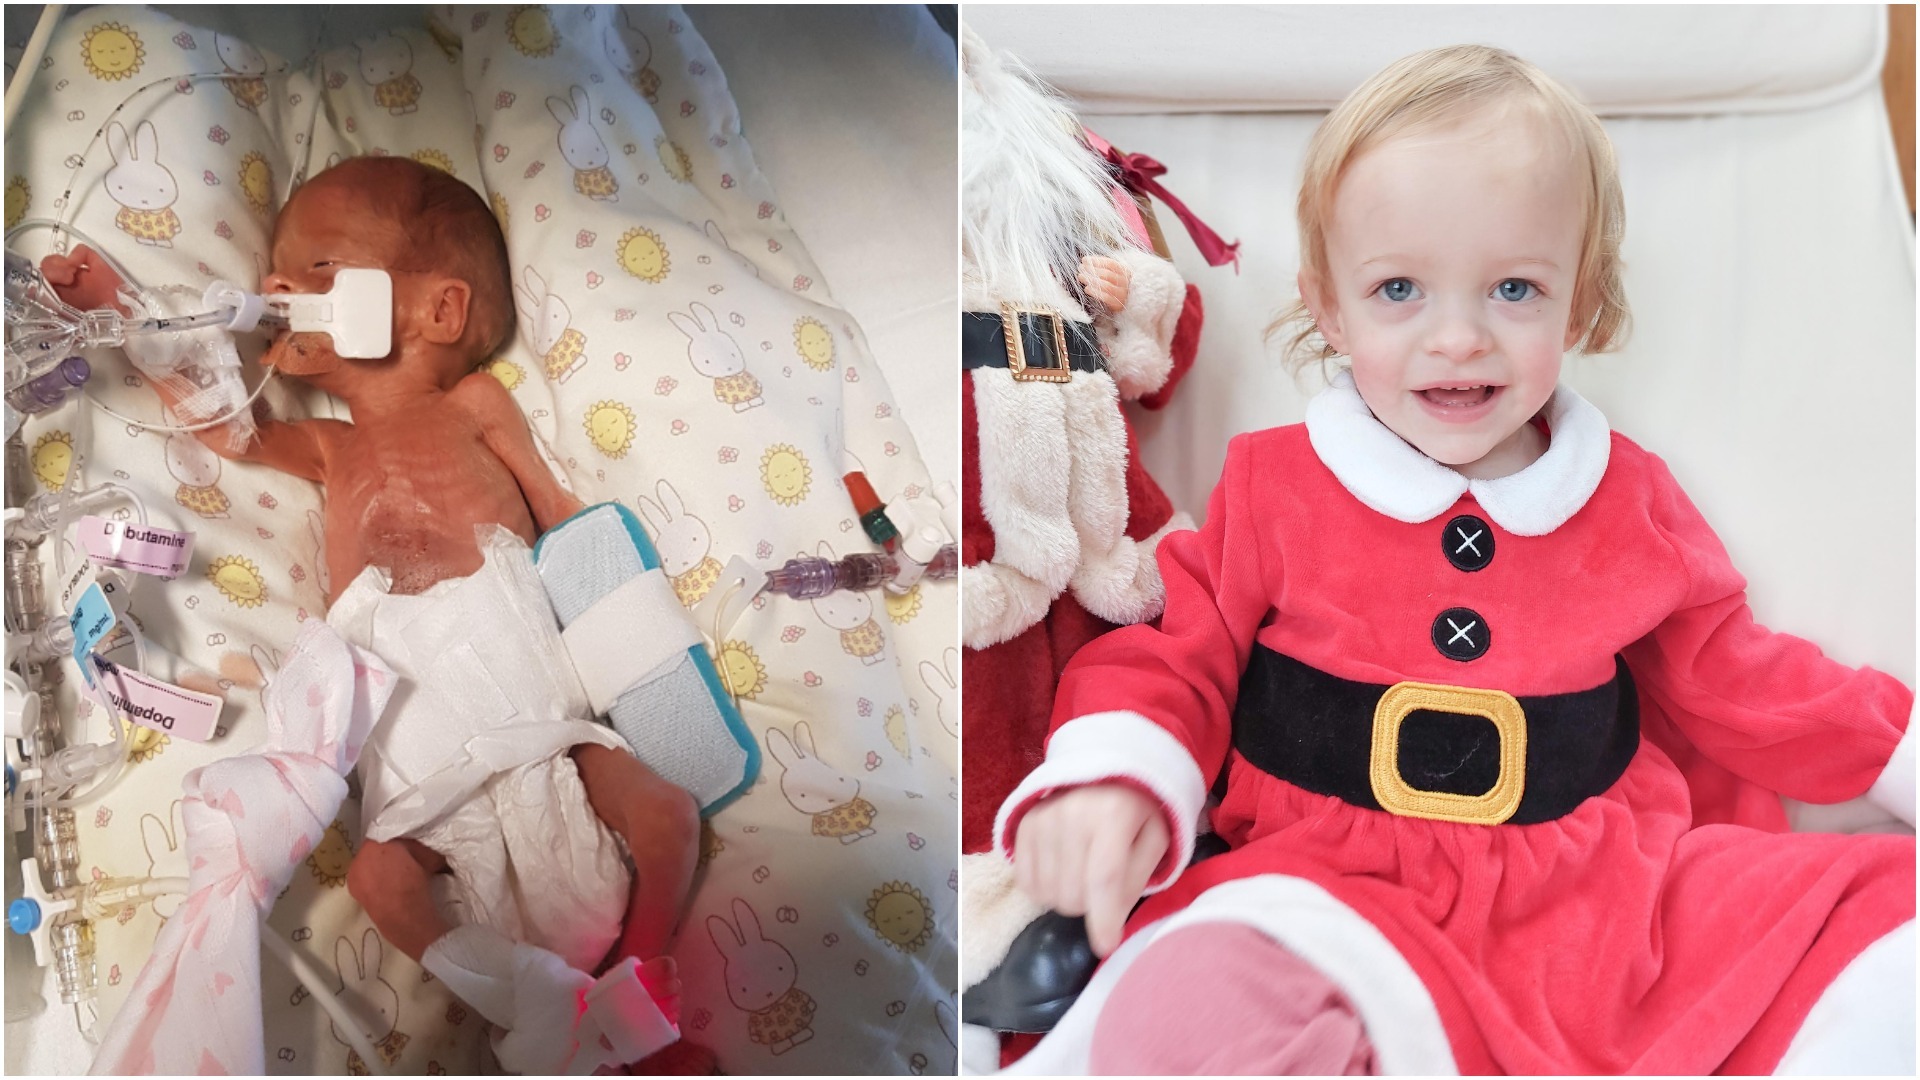 Left: Ayda Evans in a neonatal intensive care unit in hospital. Right: One-year-old Ayda celebrating Christmas in December 2021. Pictures by Tanya Evans